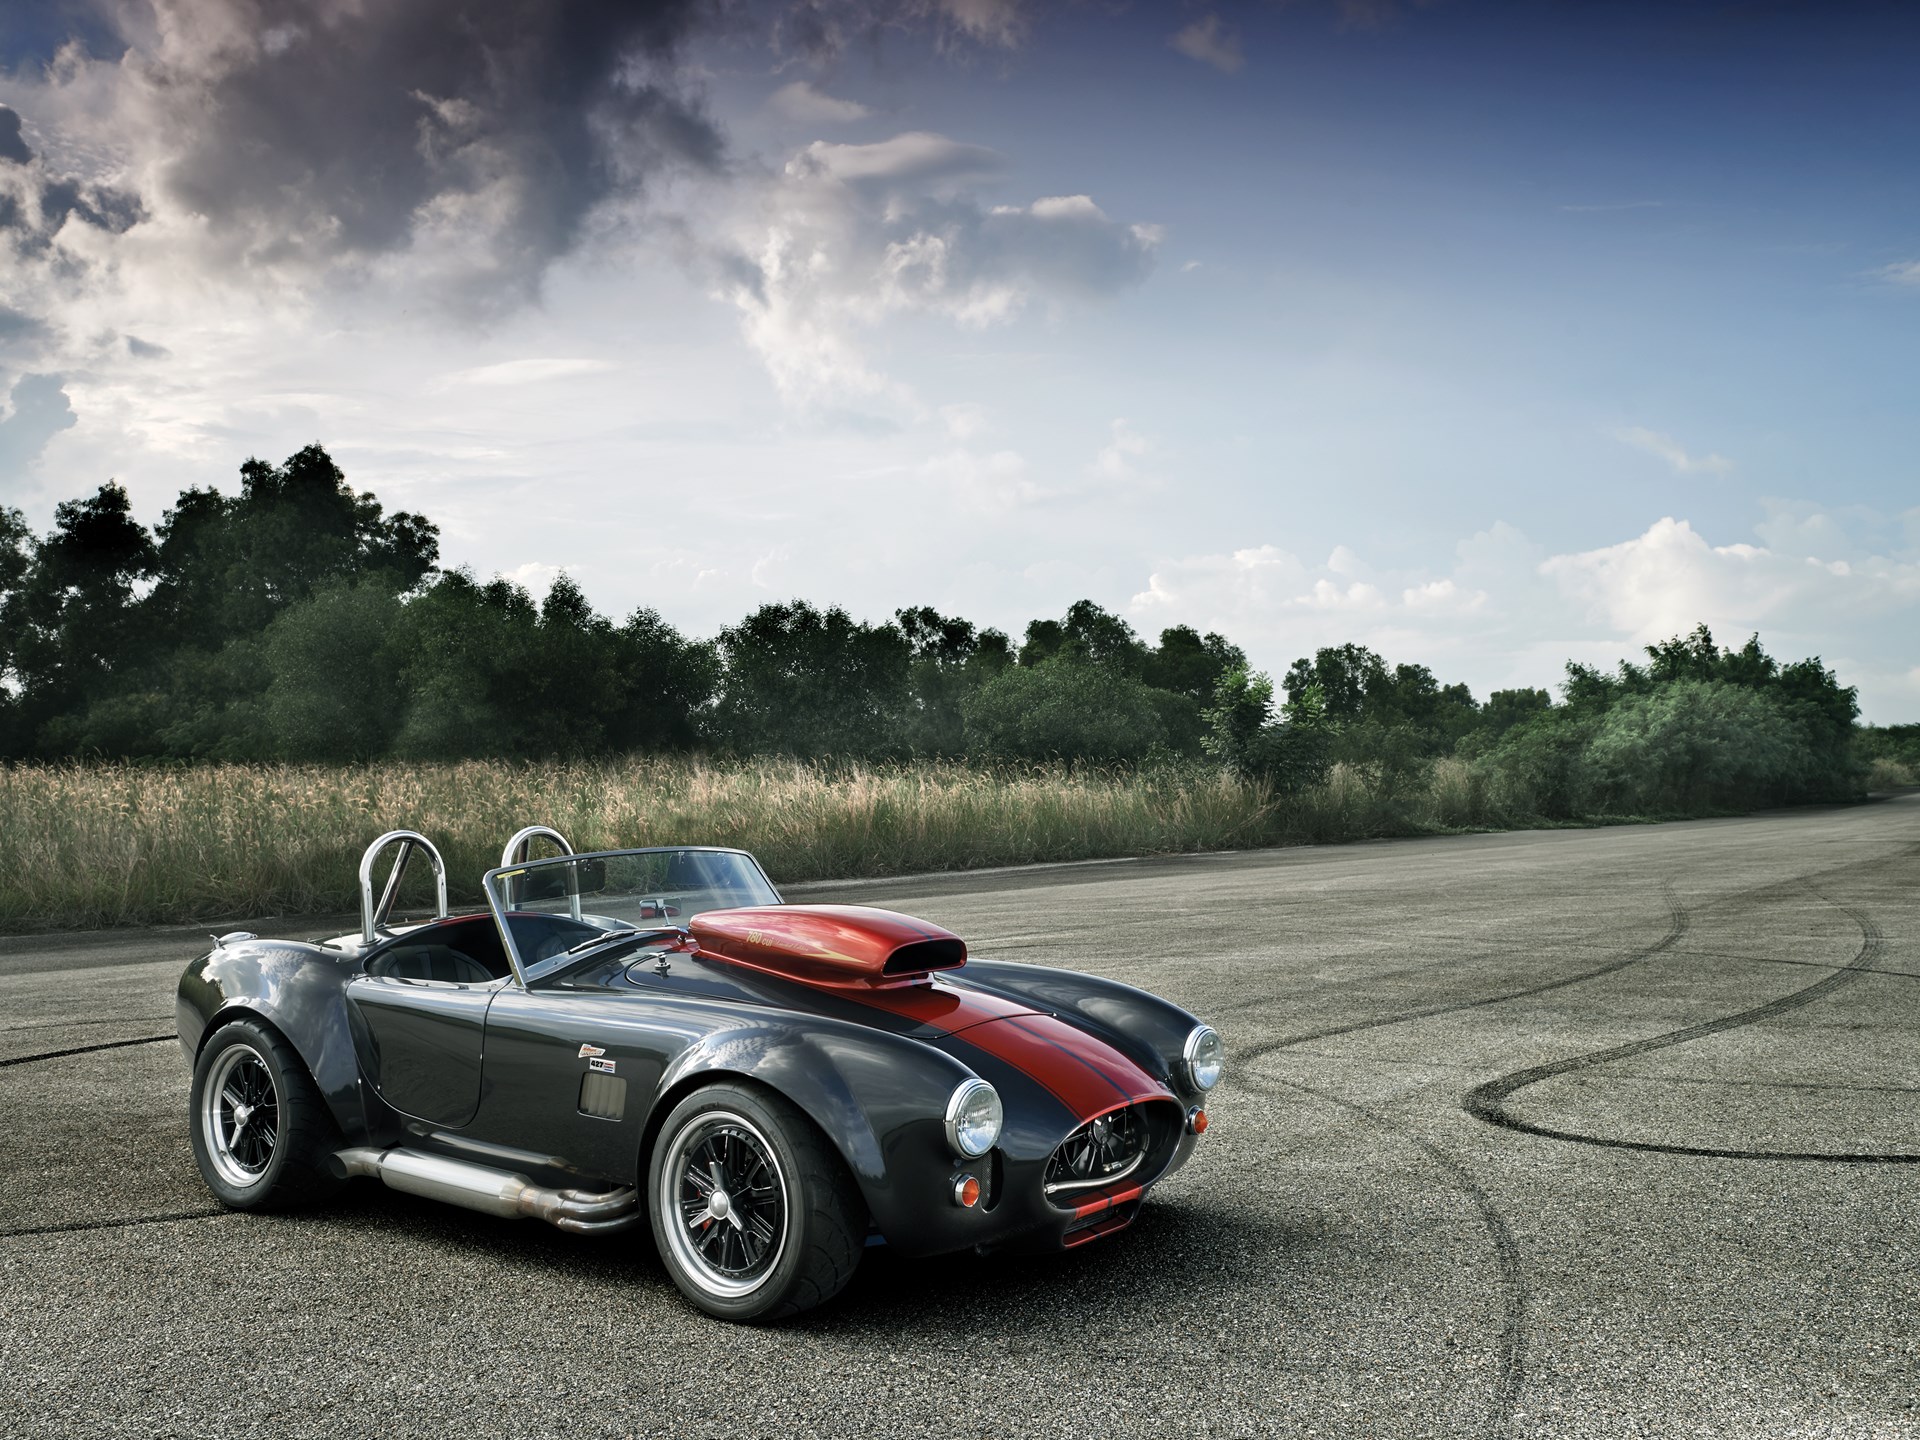 Weineck Cobra 760 CUI 14 Record-Setting Supercars That Made an Impression